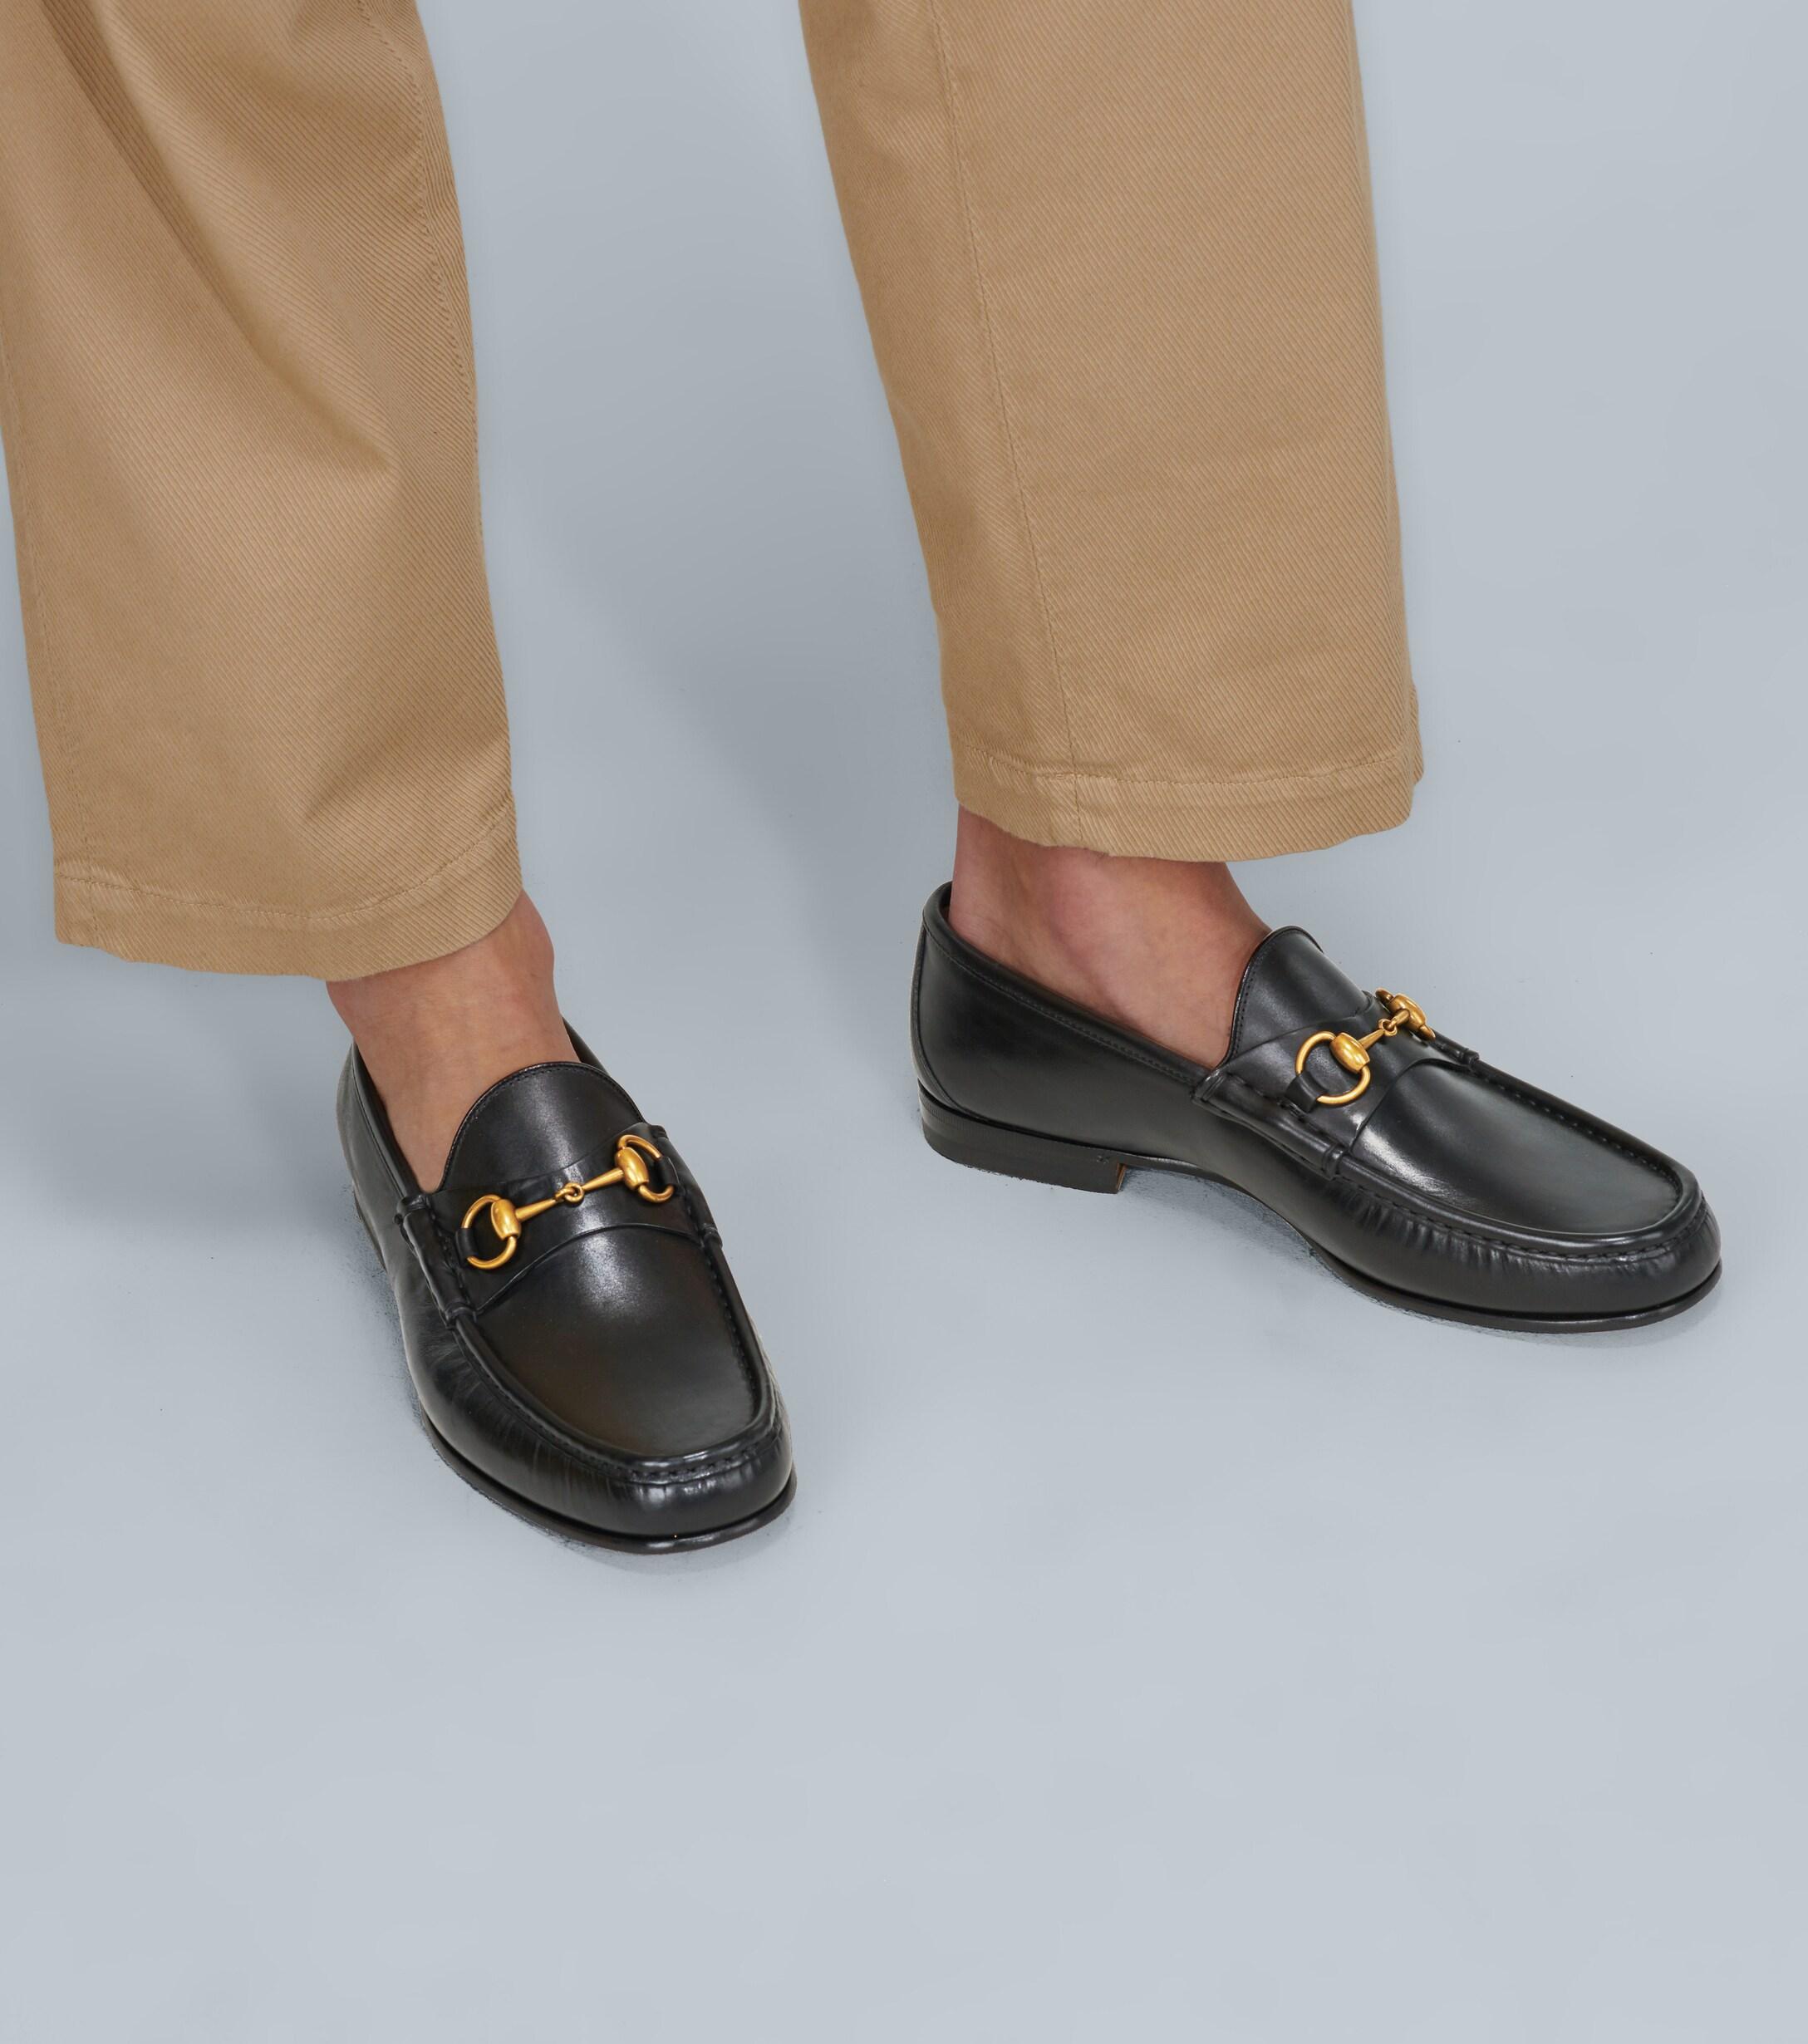 Gucci 1953 Horsebit Leather Loafer in Black for Men - Save 36% | Lyst